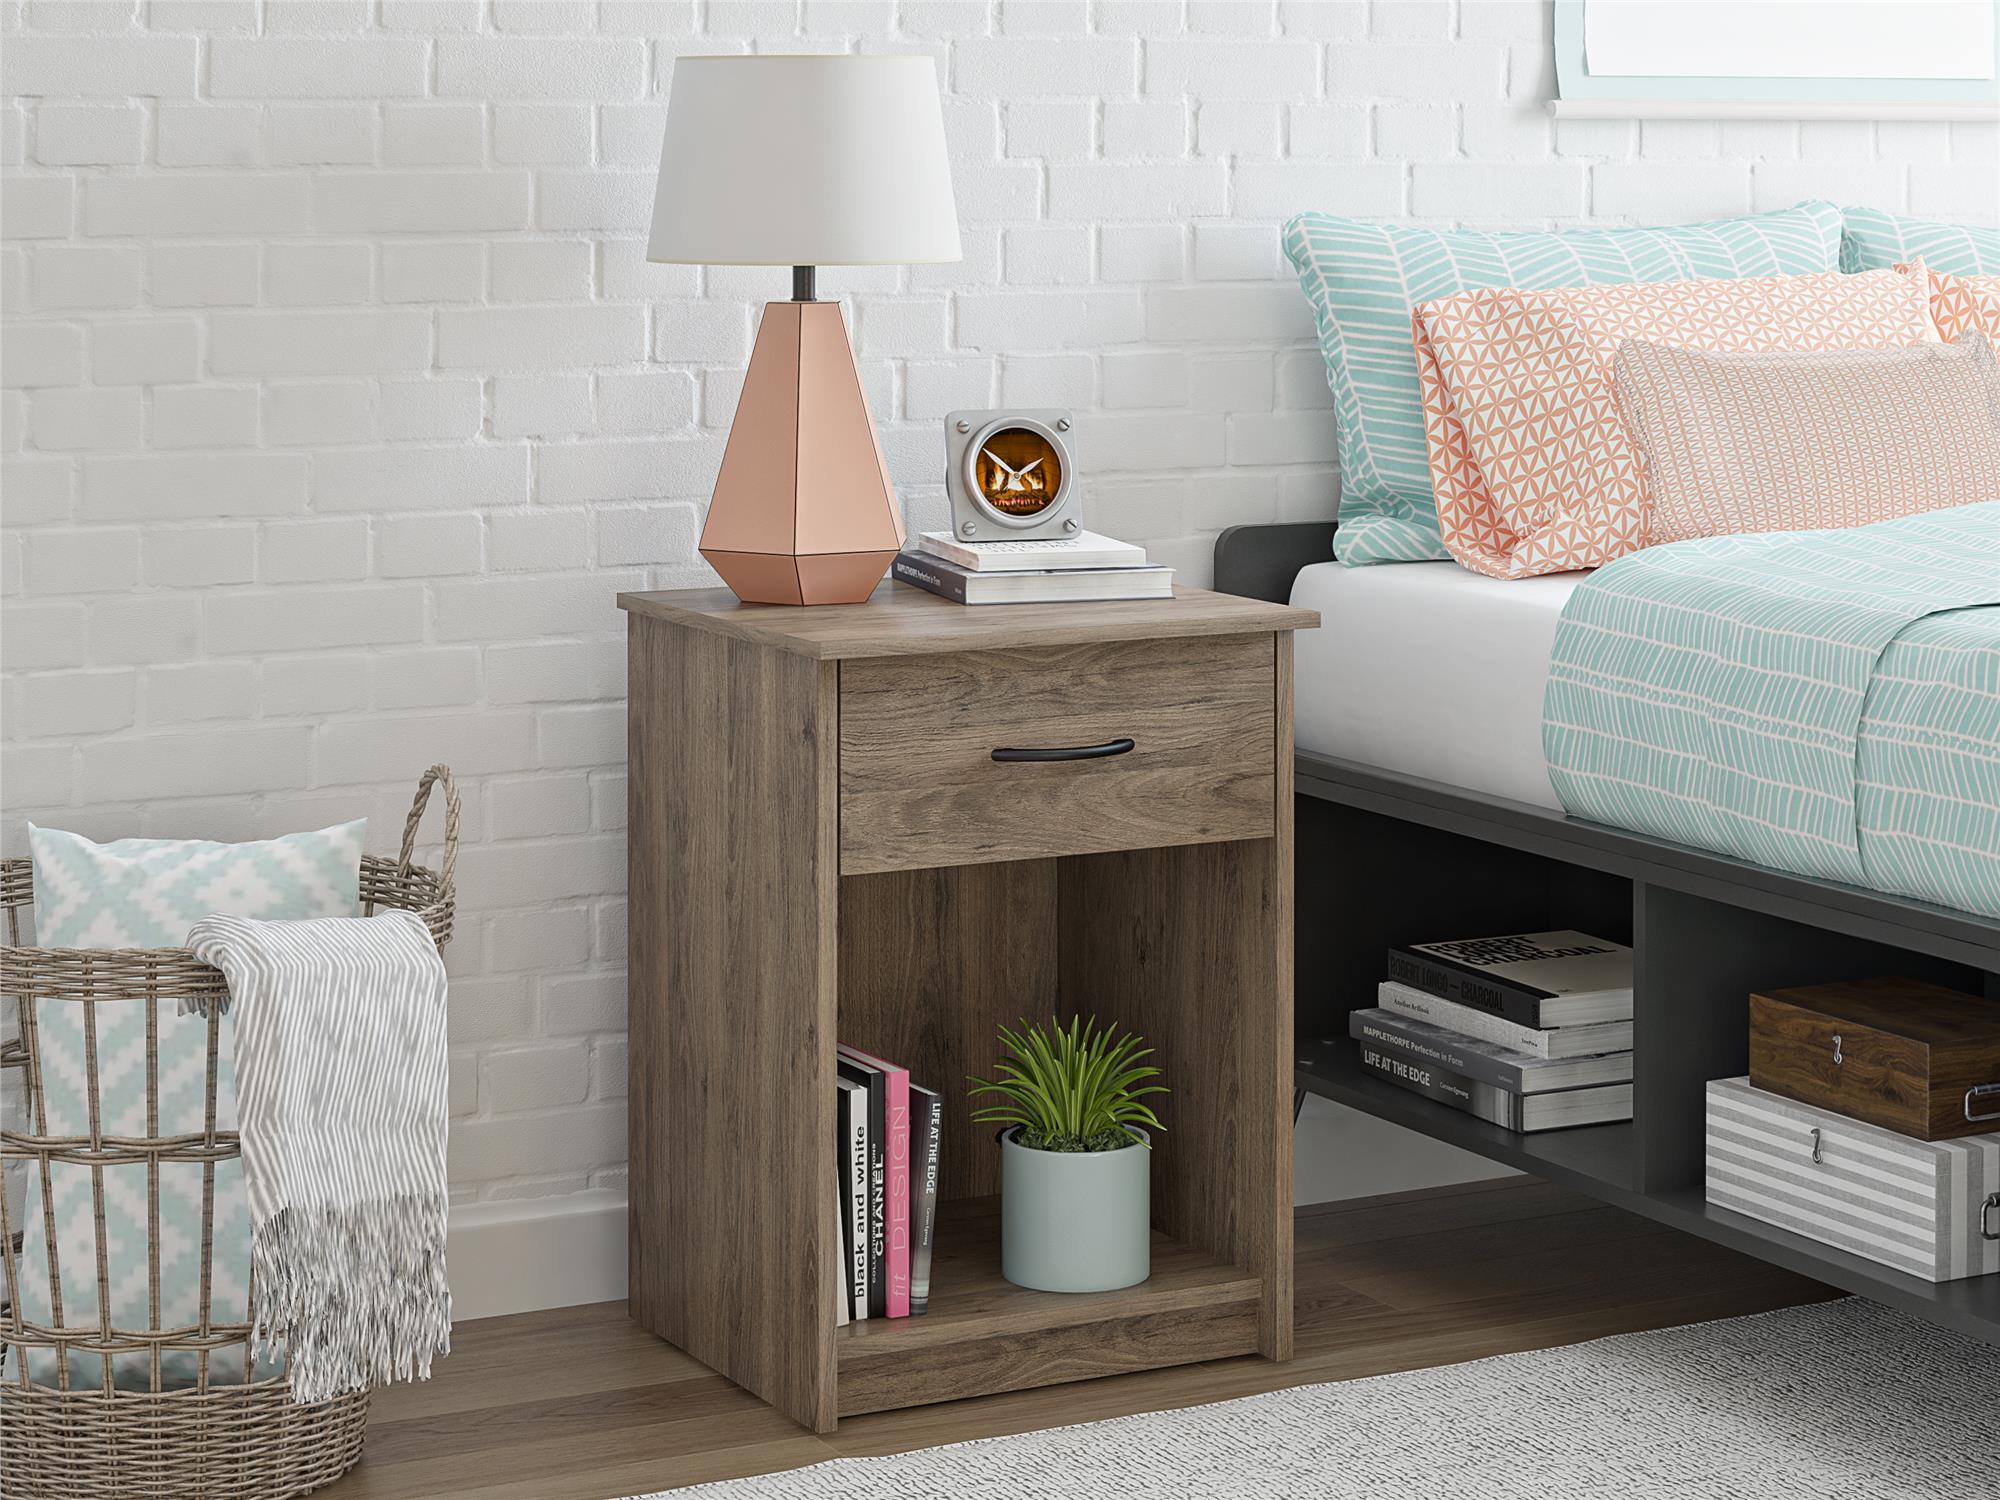 Mainstays Classic Nightstand with Drawer, Rustic Oak - image 10 of 13